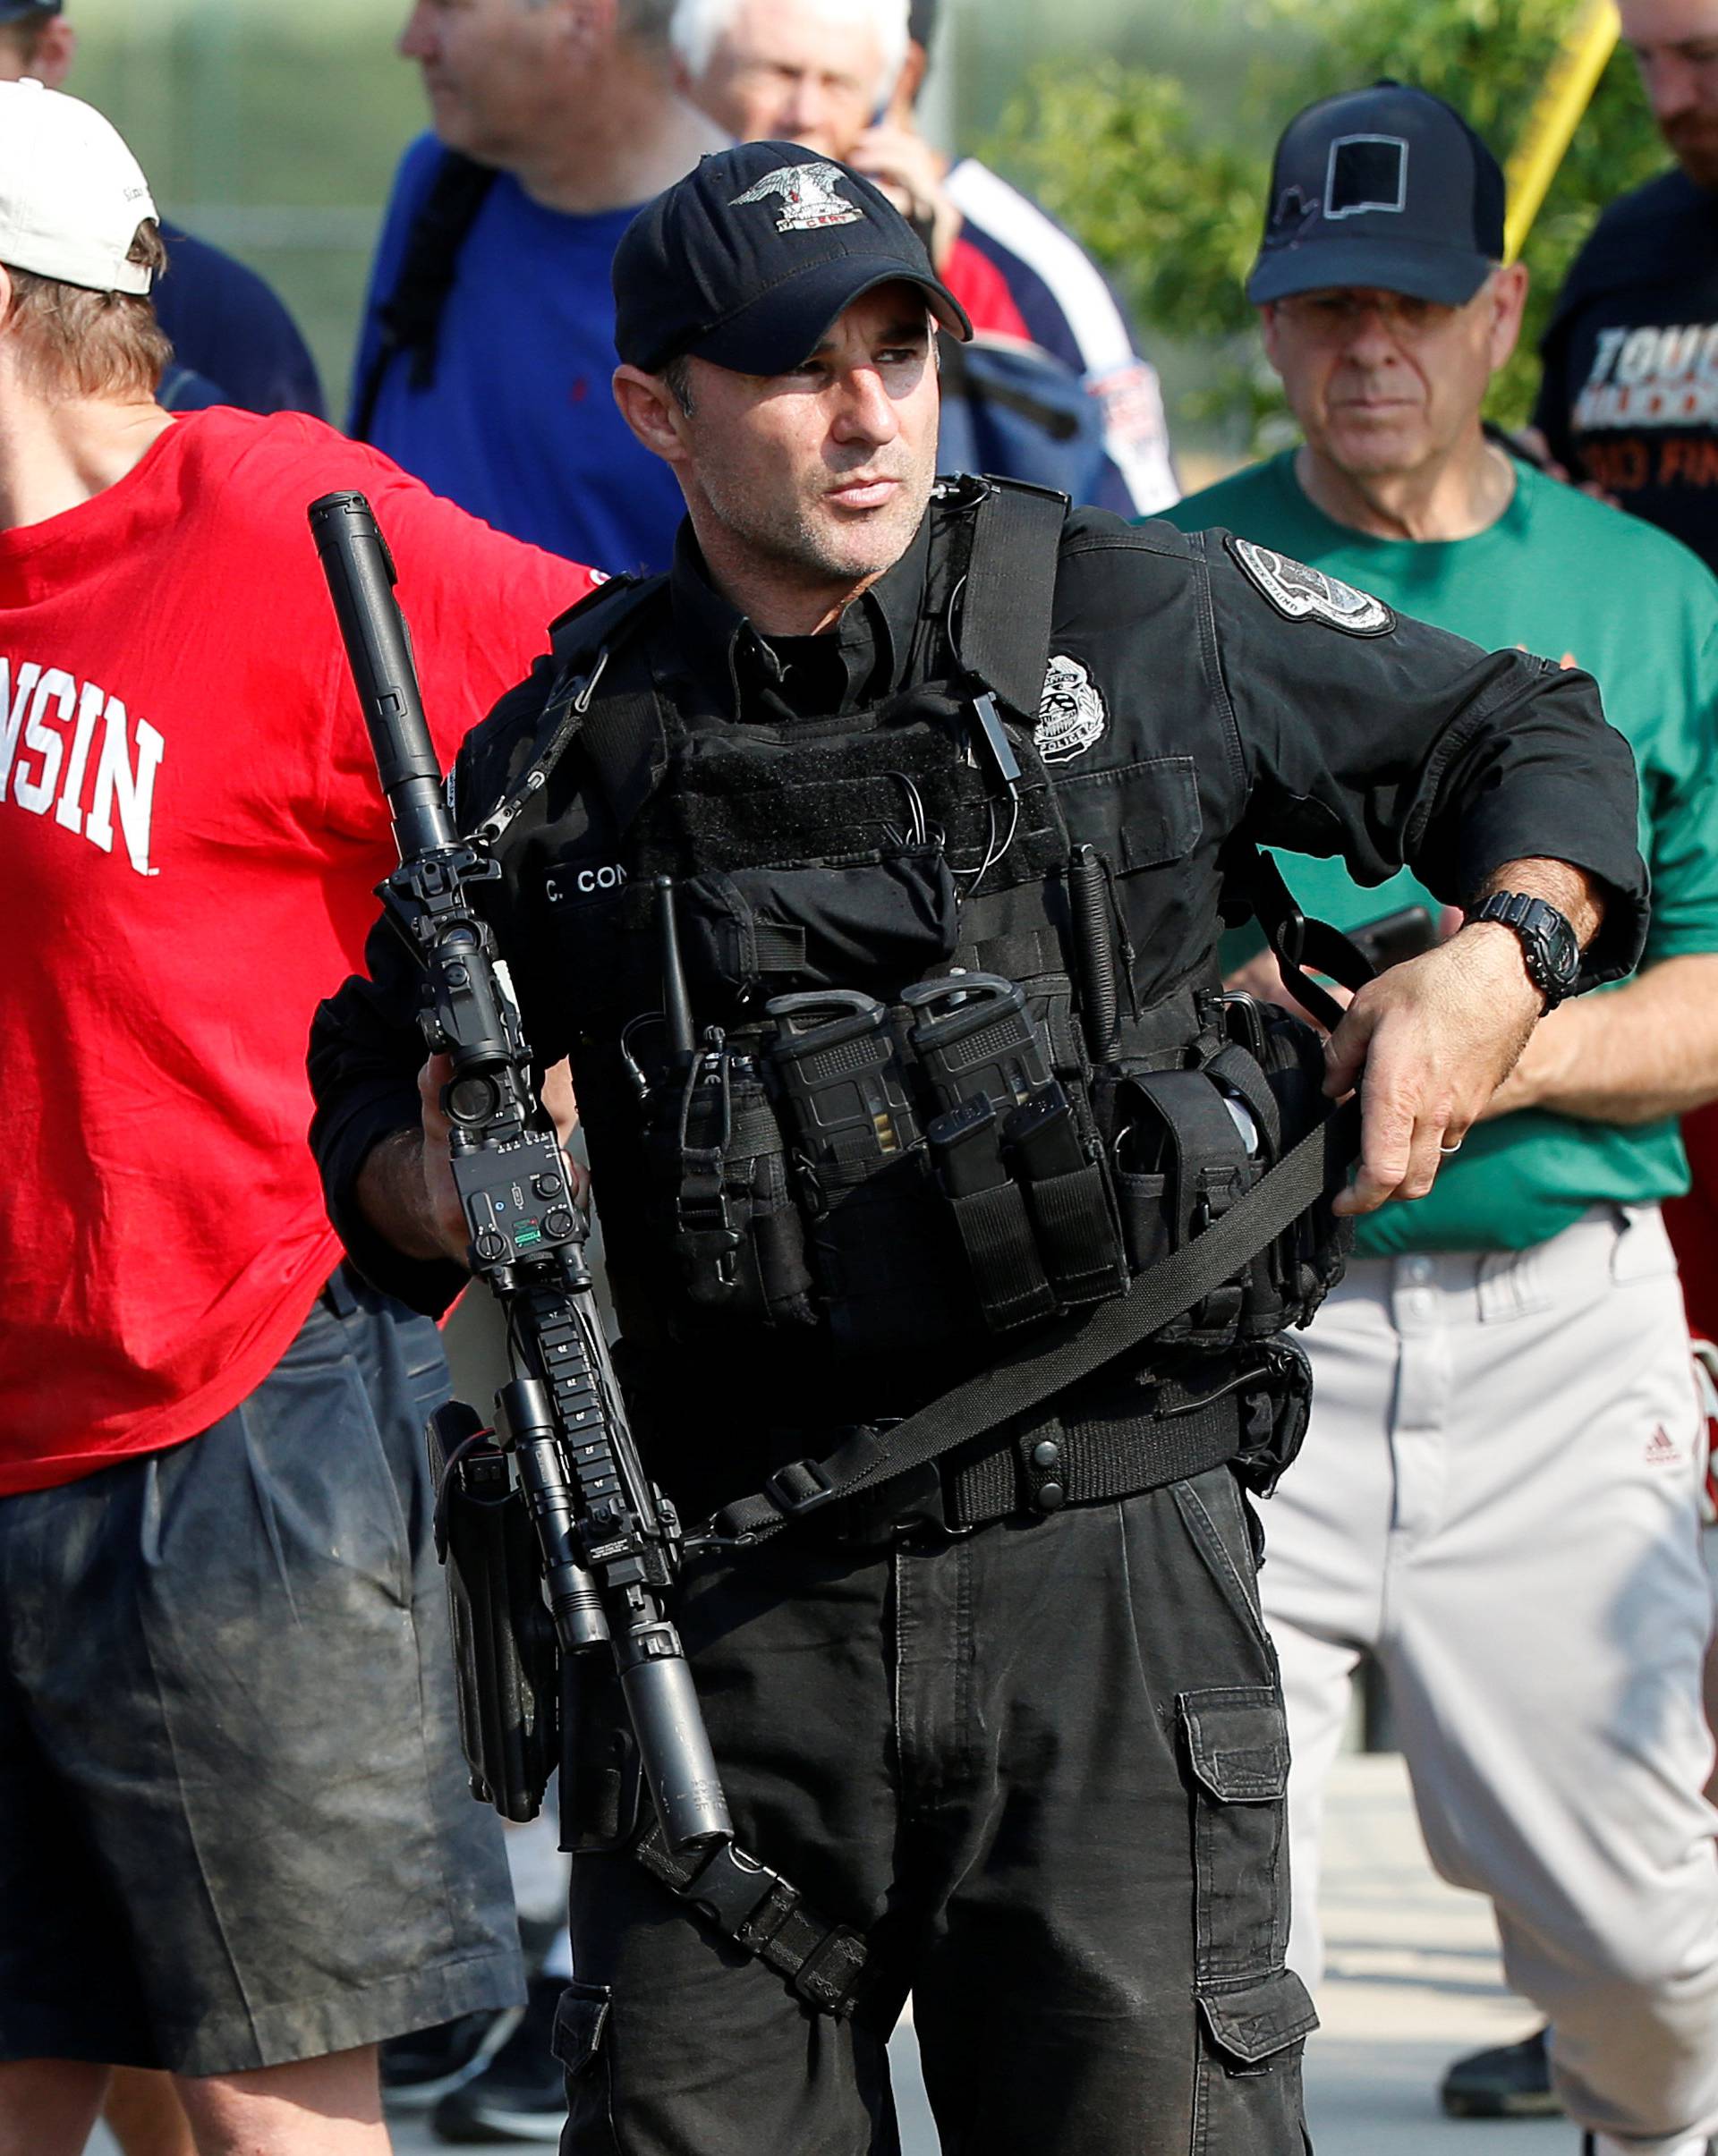 A police officer escorts members of Congress and staff from the scene after a gunman opened fire on members of Congress during baseball practice in Alexandria, Virginia